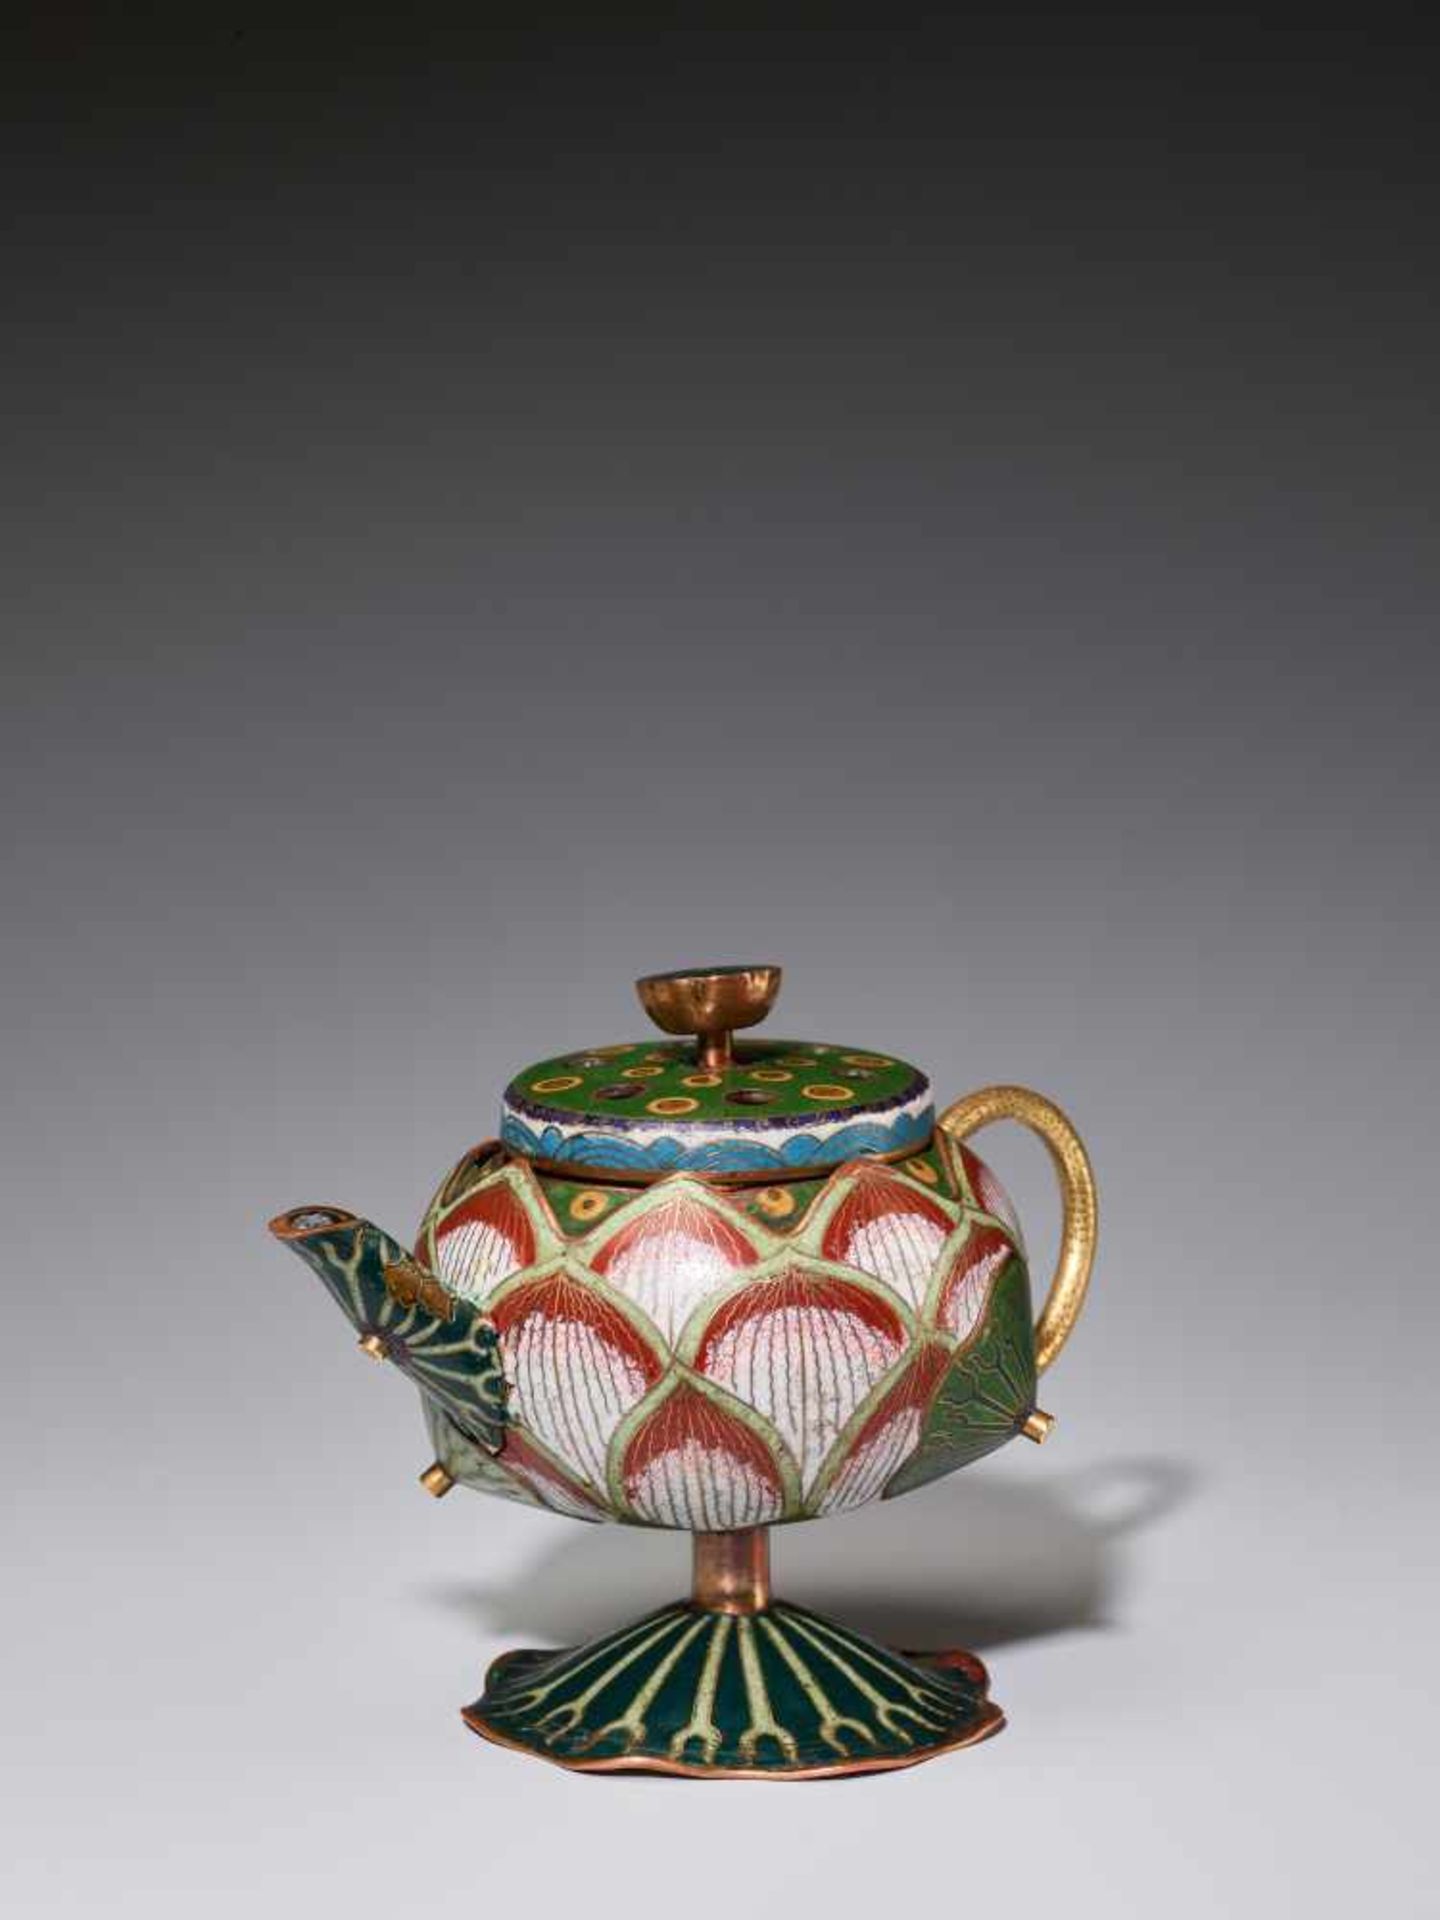 A EXTREMELY RARE CLOISONNE ENAMEL LOTUS-LEAF FORM EWER, 18TH CENTURYFire gilt and incised bronze, - Image 4 of 11